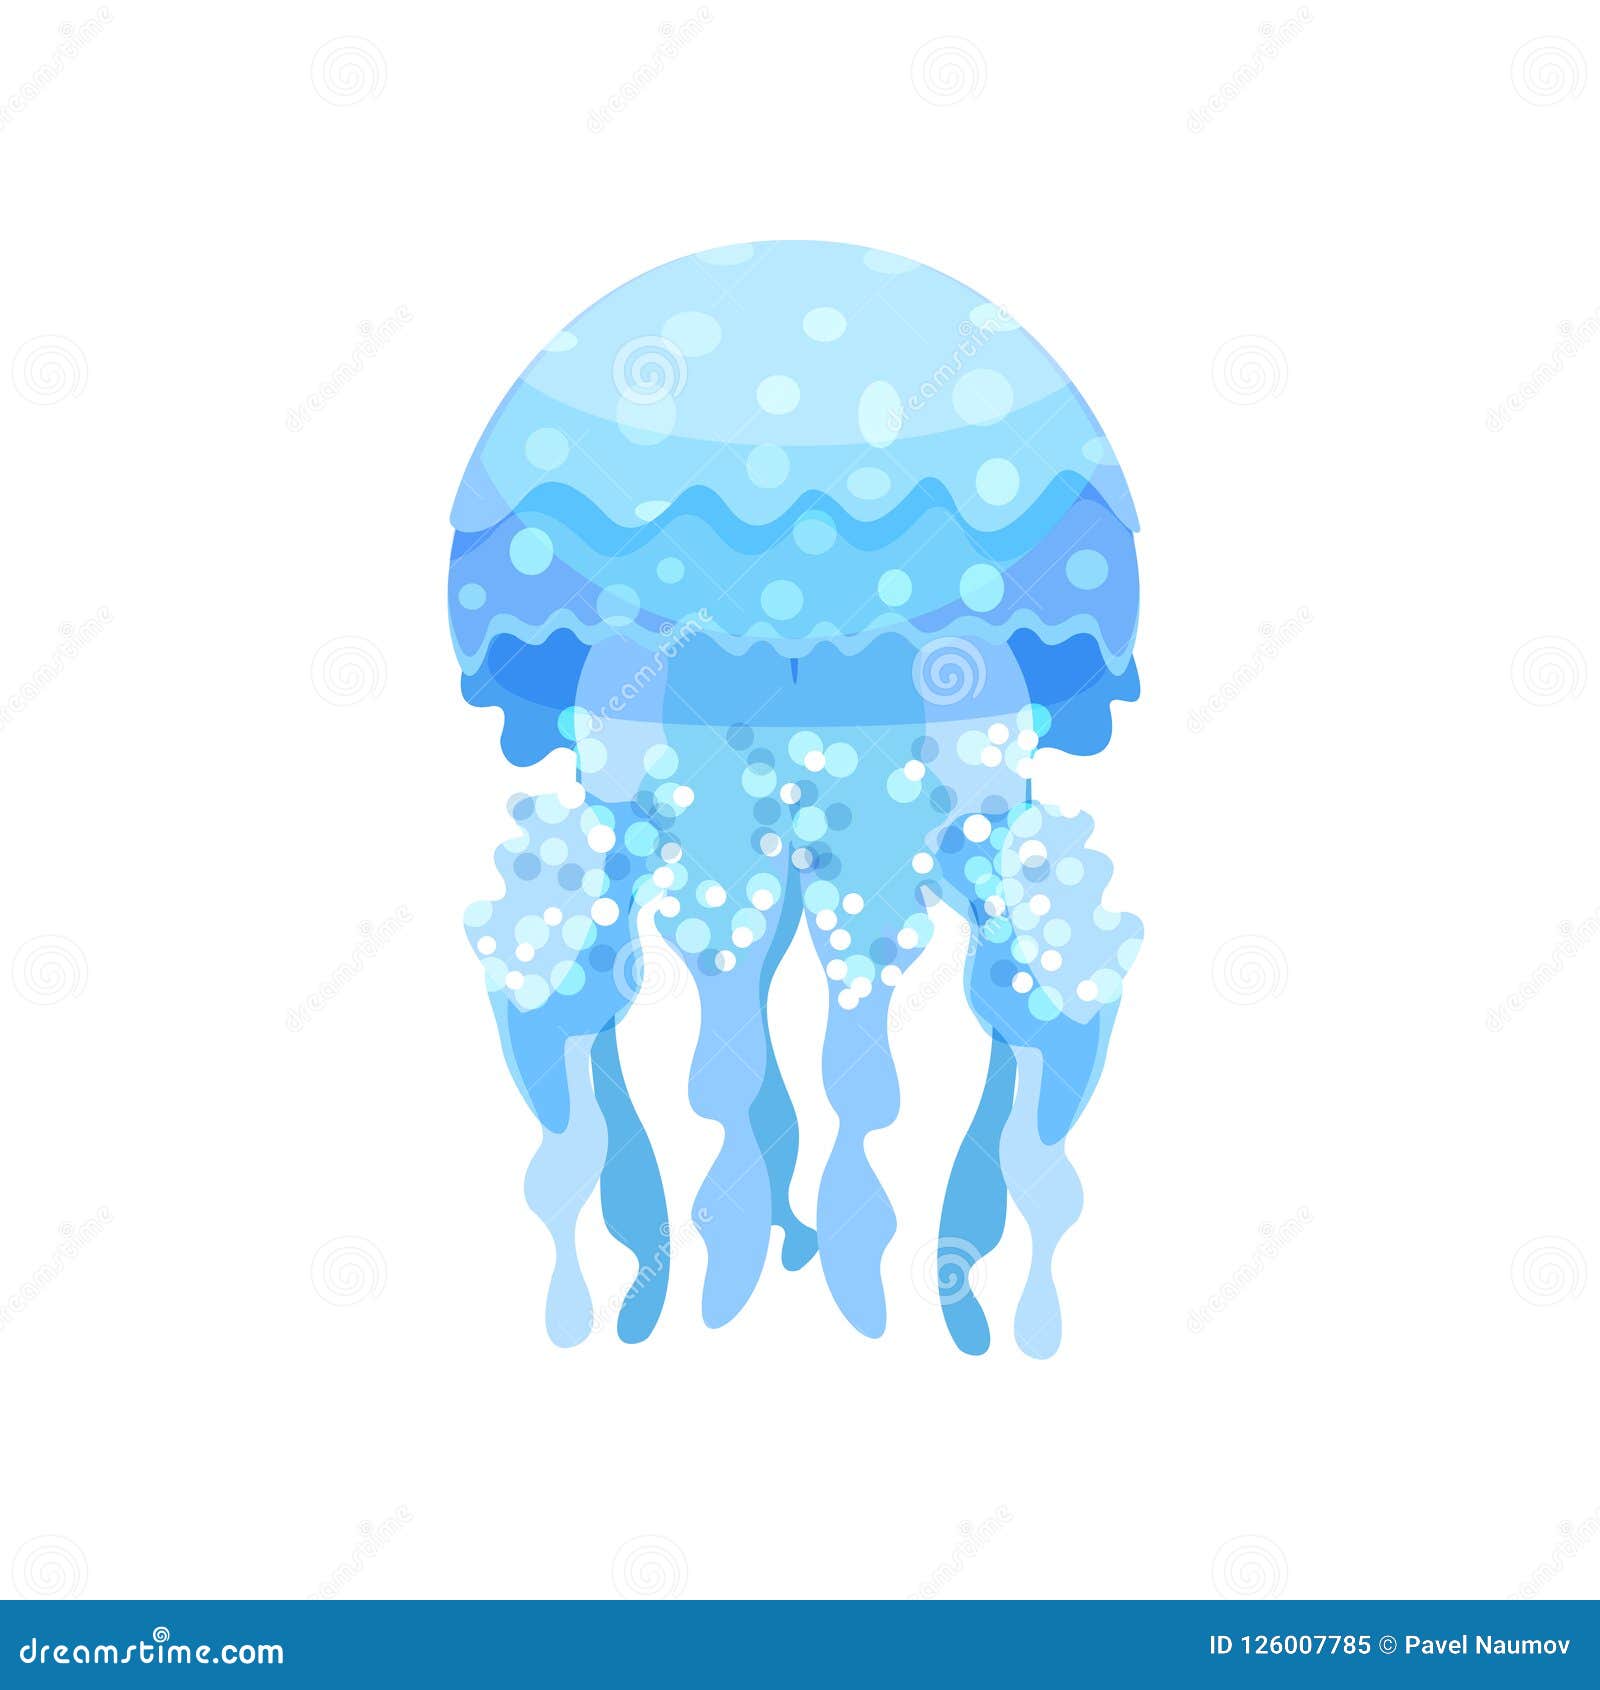 Beautiful Transparent Jellyfish Sea Creature Vector Illustration on a White  Background Stock Vector - Illustration of marine, fish: 126007785